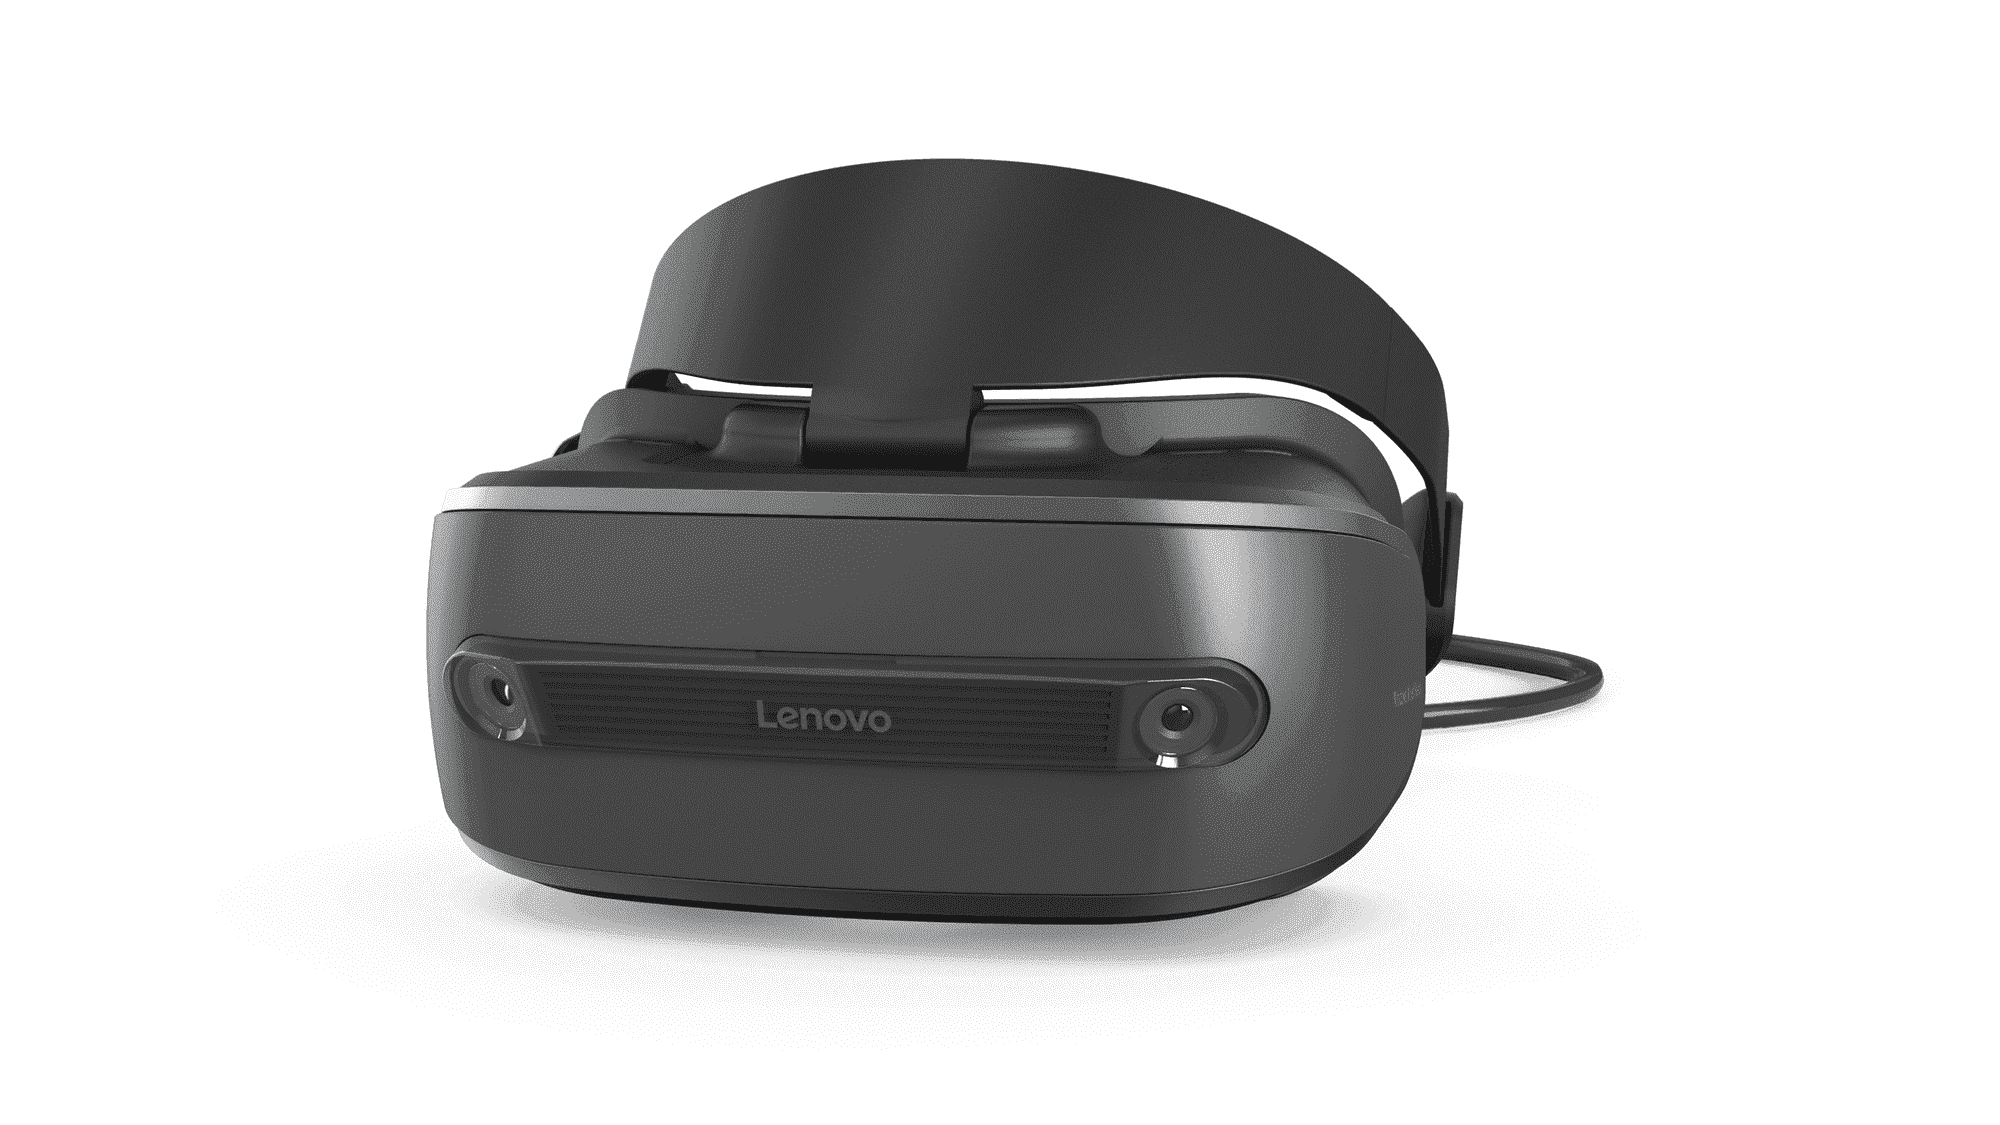 Samsung HMD Odyssey+ is a new Windows Mixed Reality headset 1a4459ebcd24af25550220425d322628.png